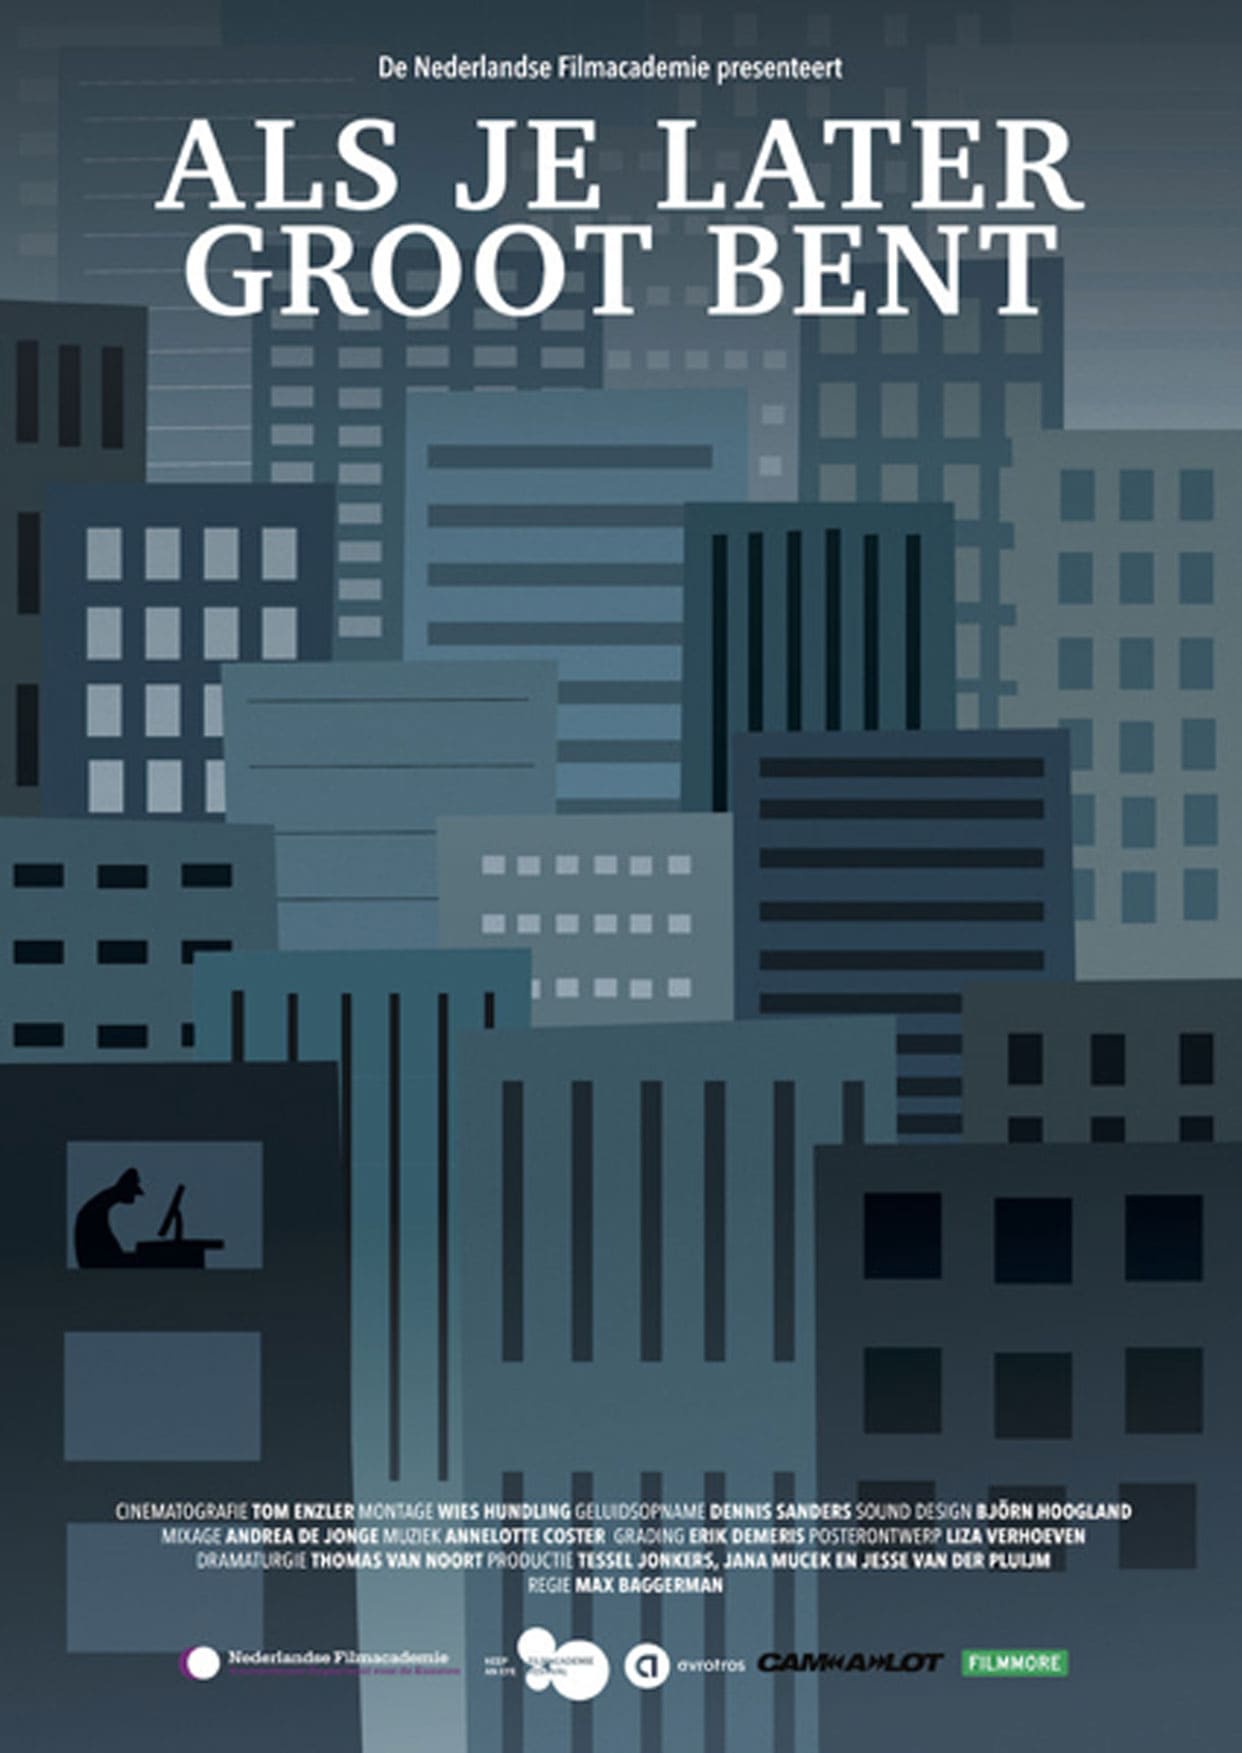 ALS-JE-LATER-GROOT-BENT - -WHEN-YOU-GROW-UP-Max-Baggermann